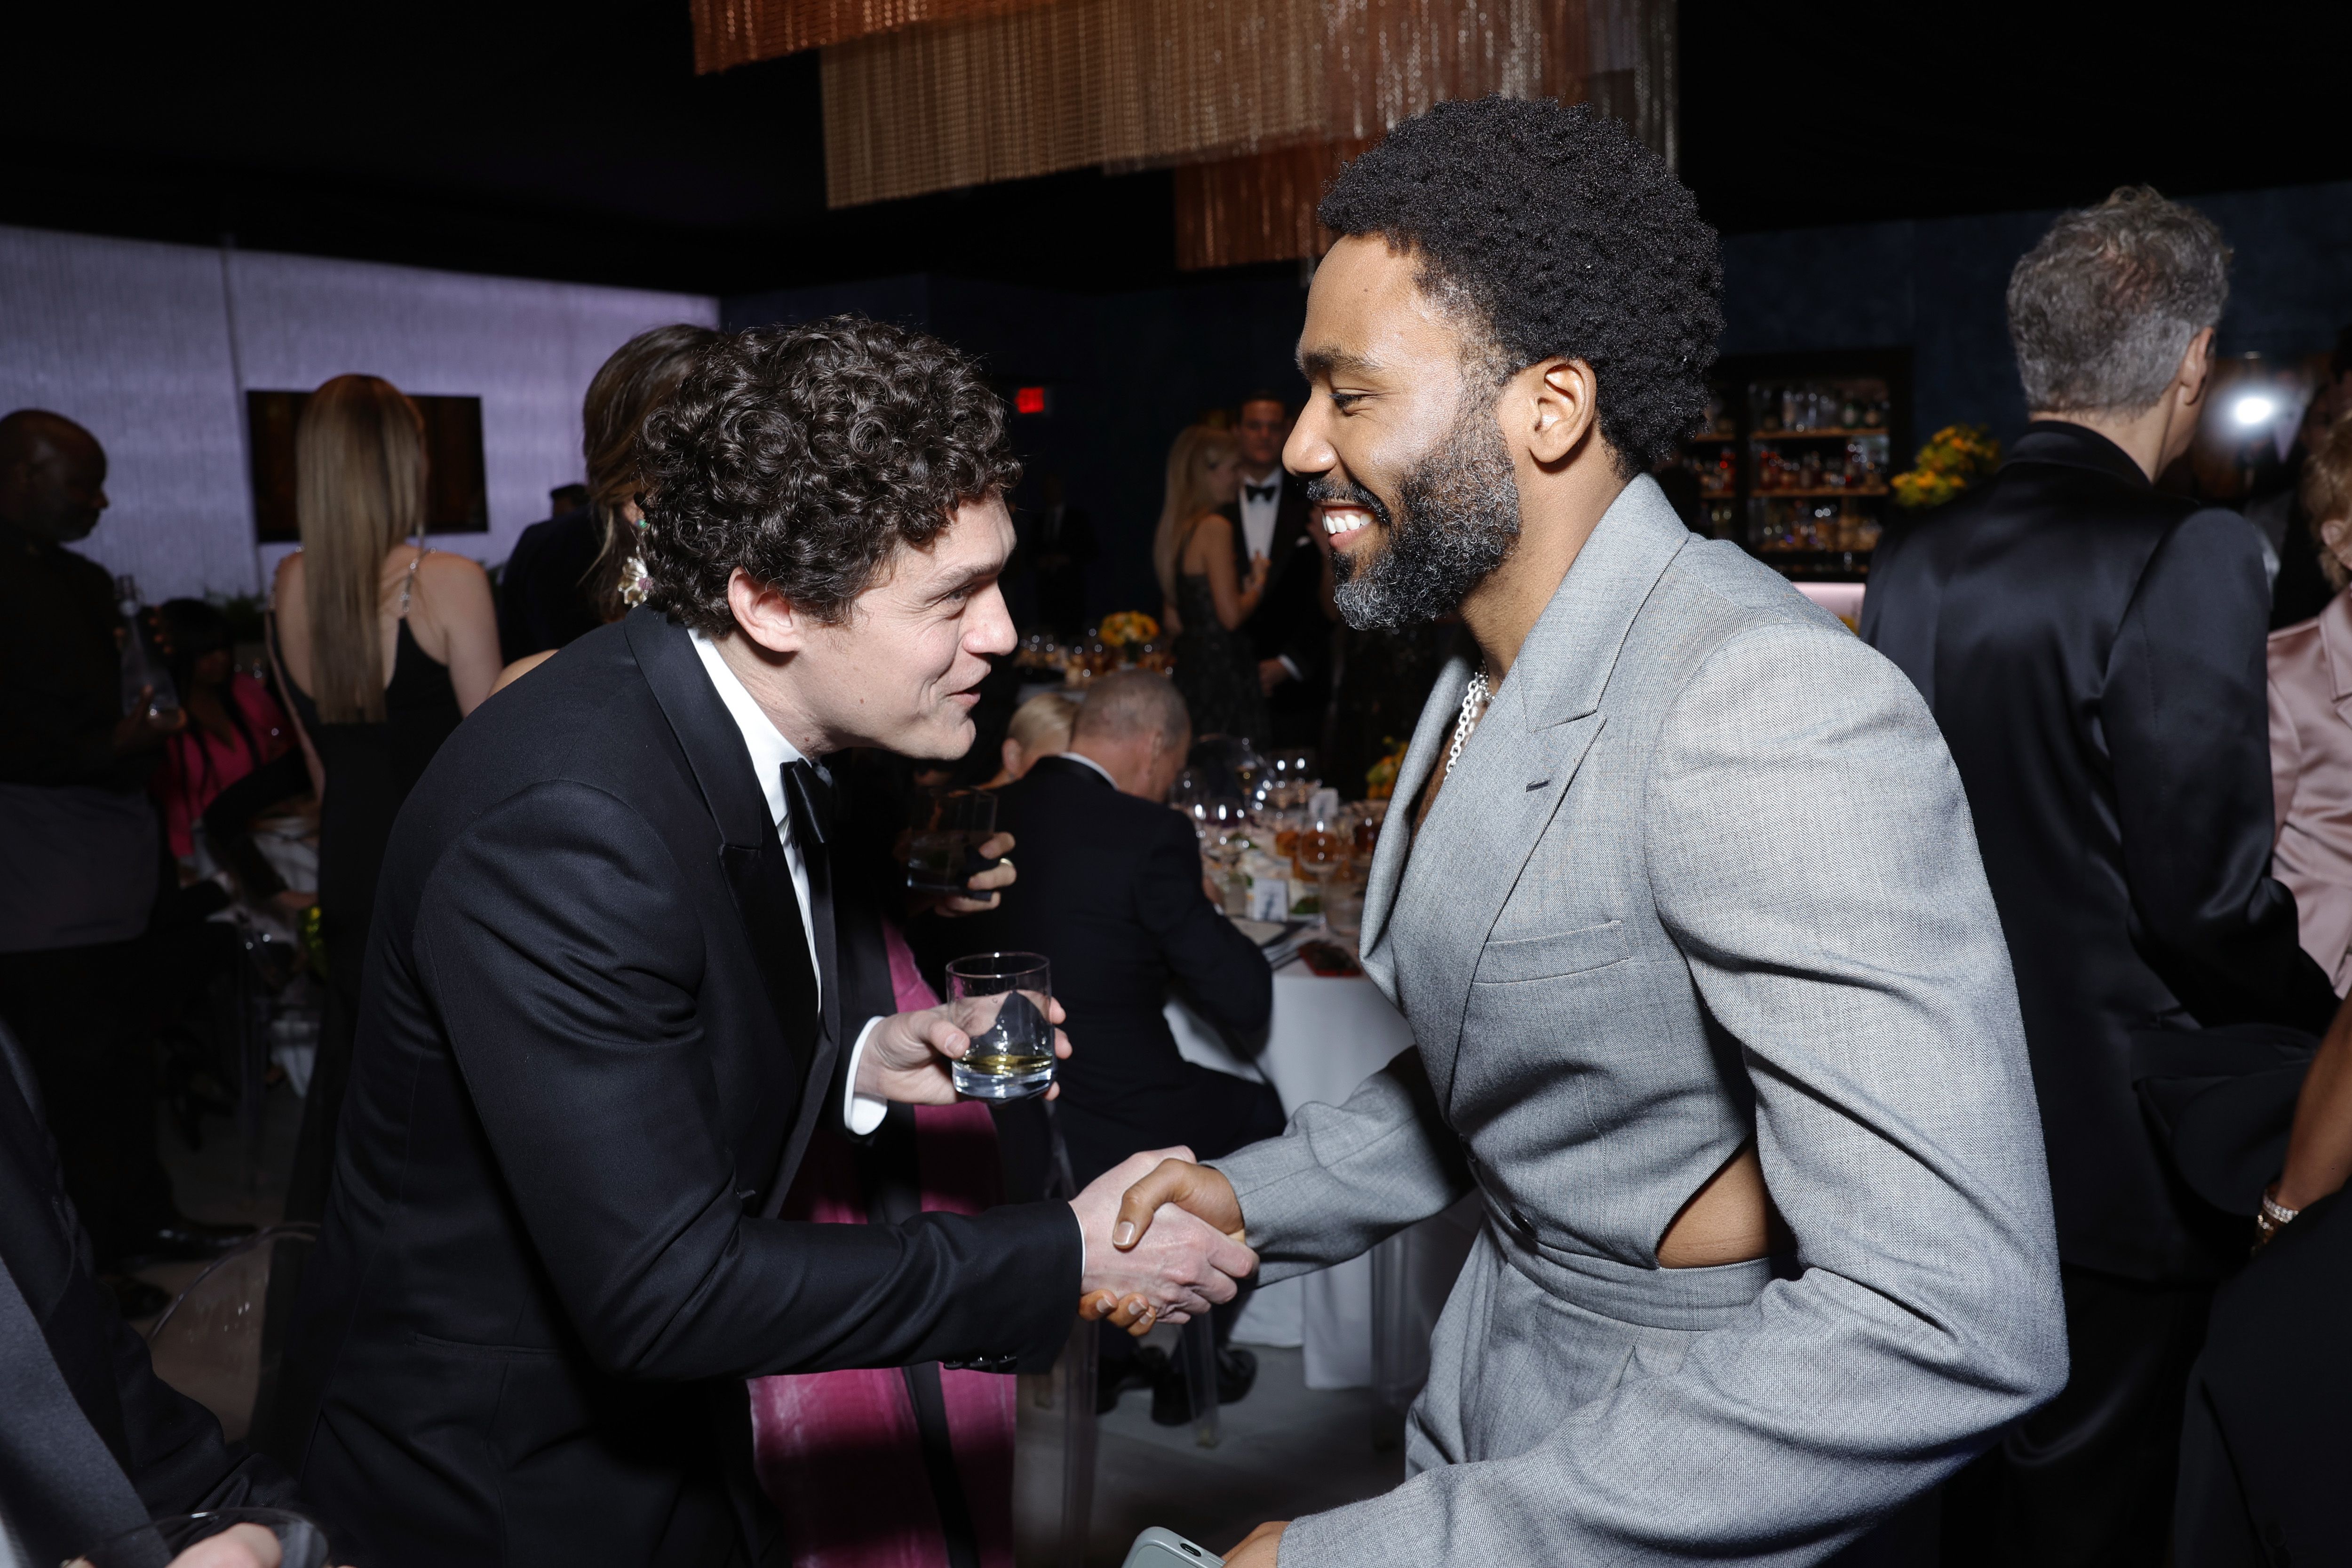 Donald Glover Spider-Man Cameo Revealed by Spider-Verse Team